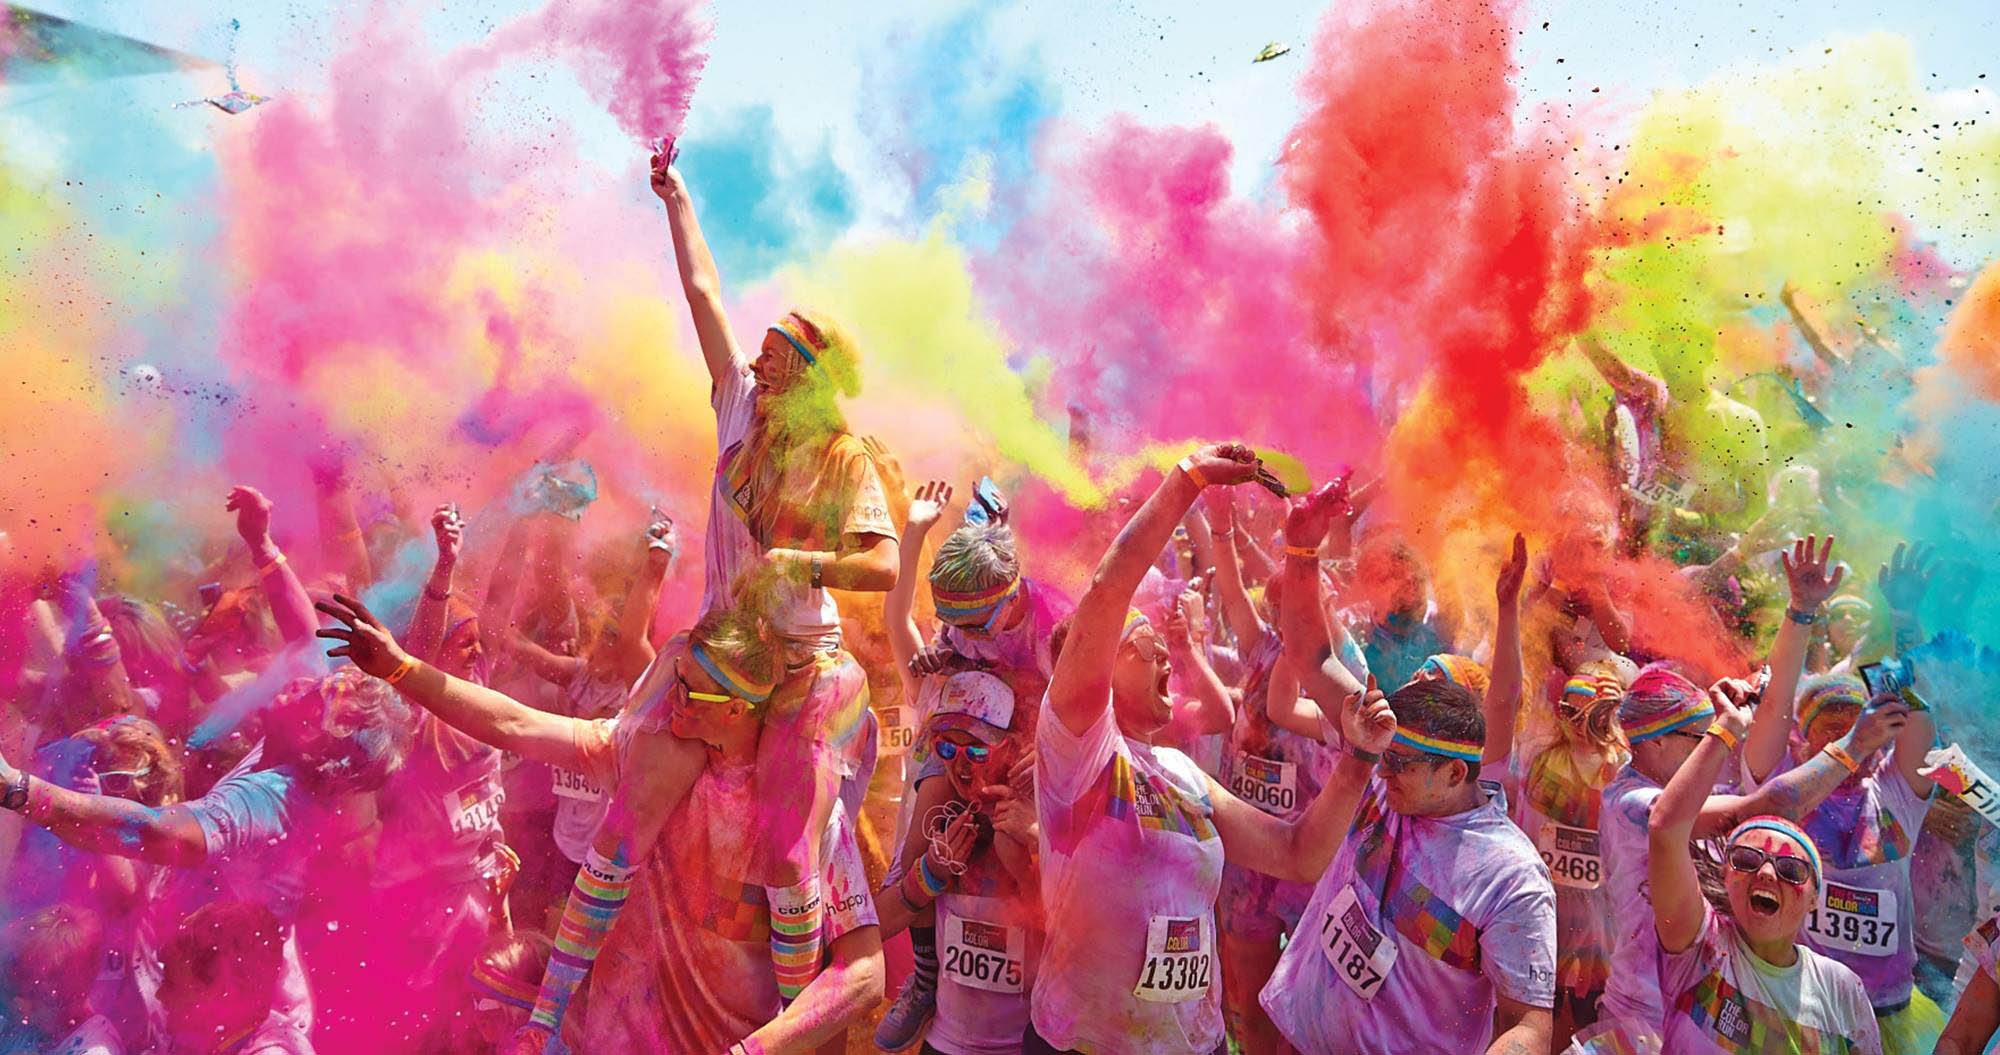 The Happiest 5k on the Planet, "Color Run Hero Tour Seoul"